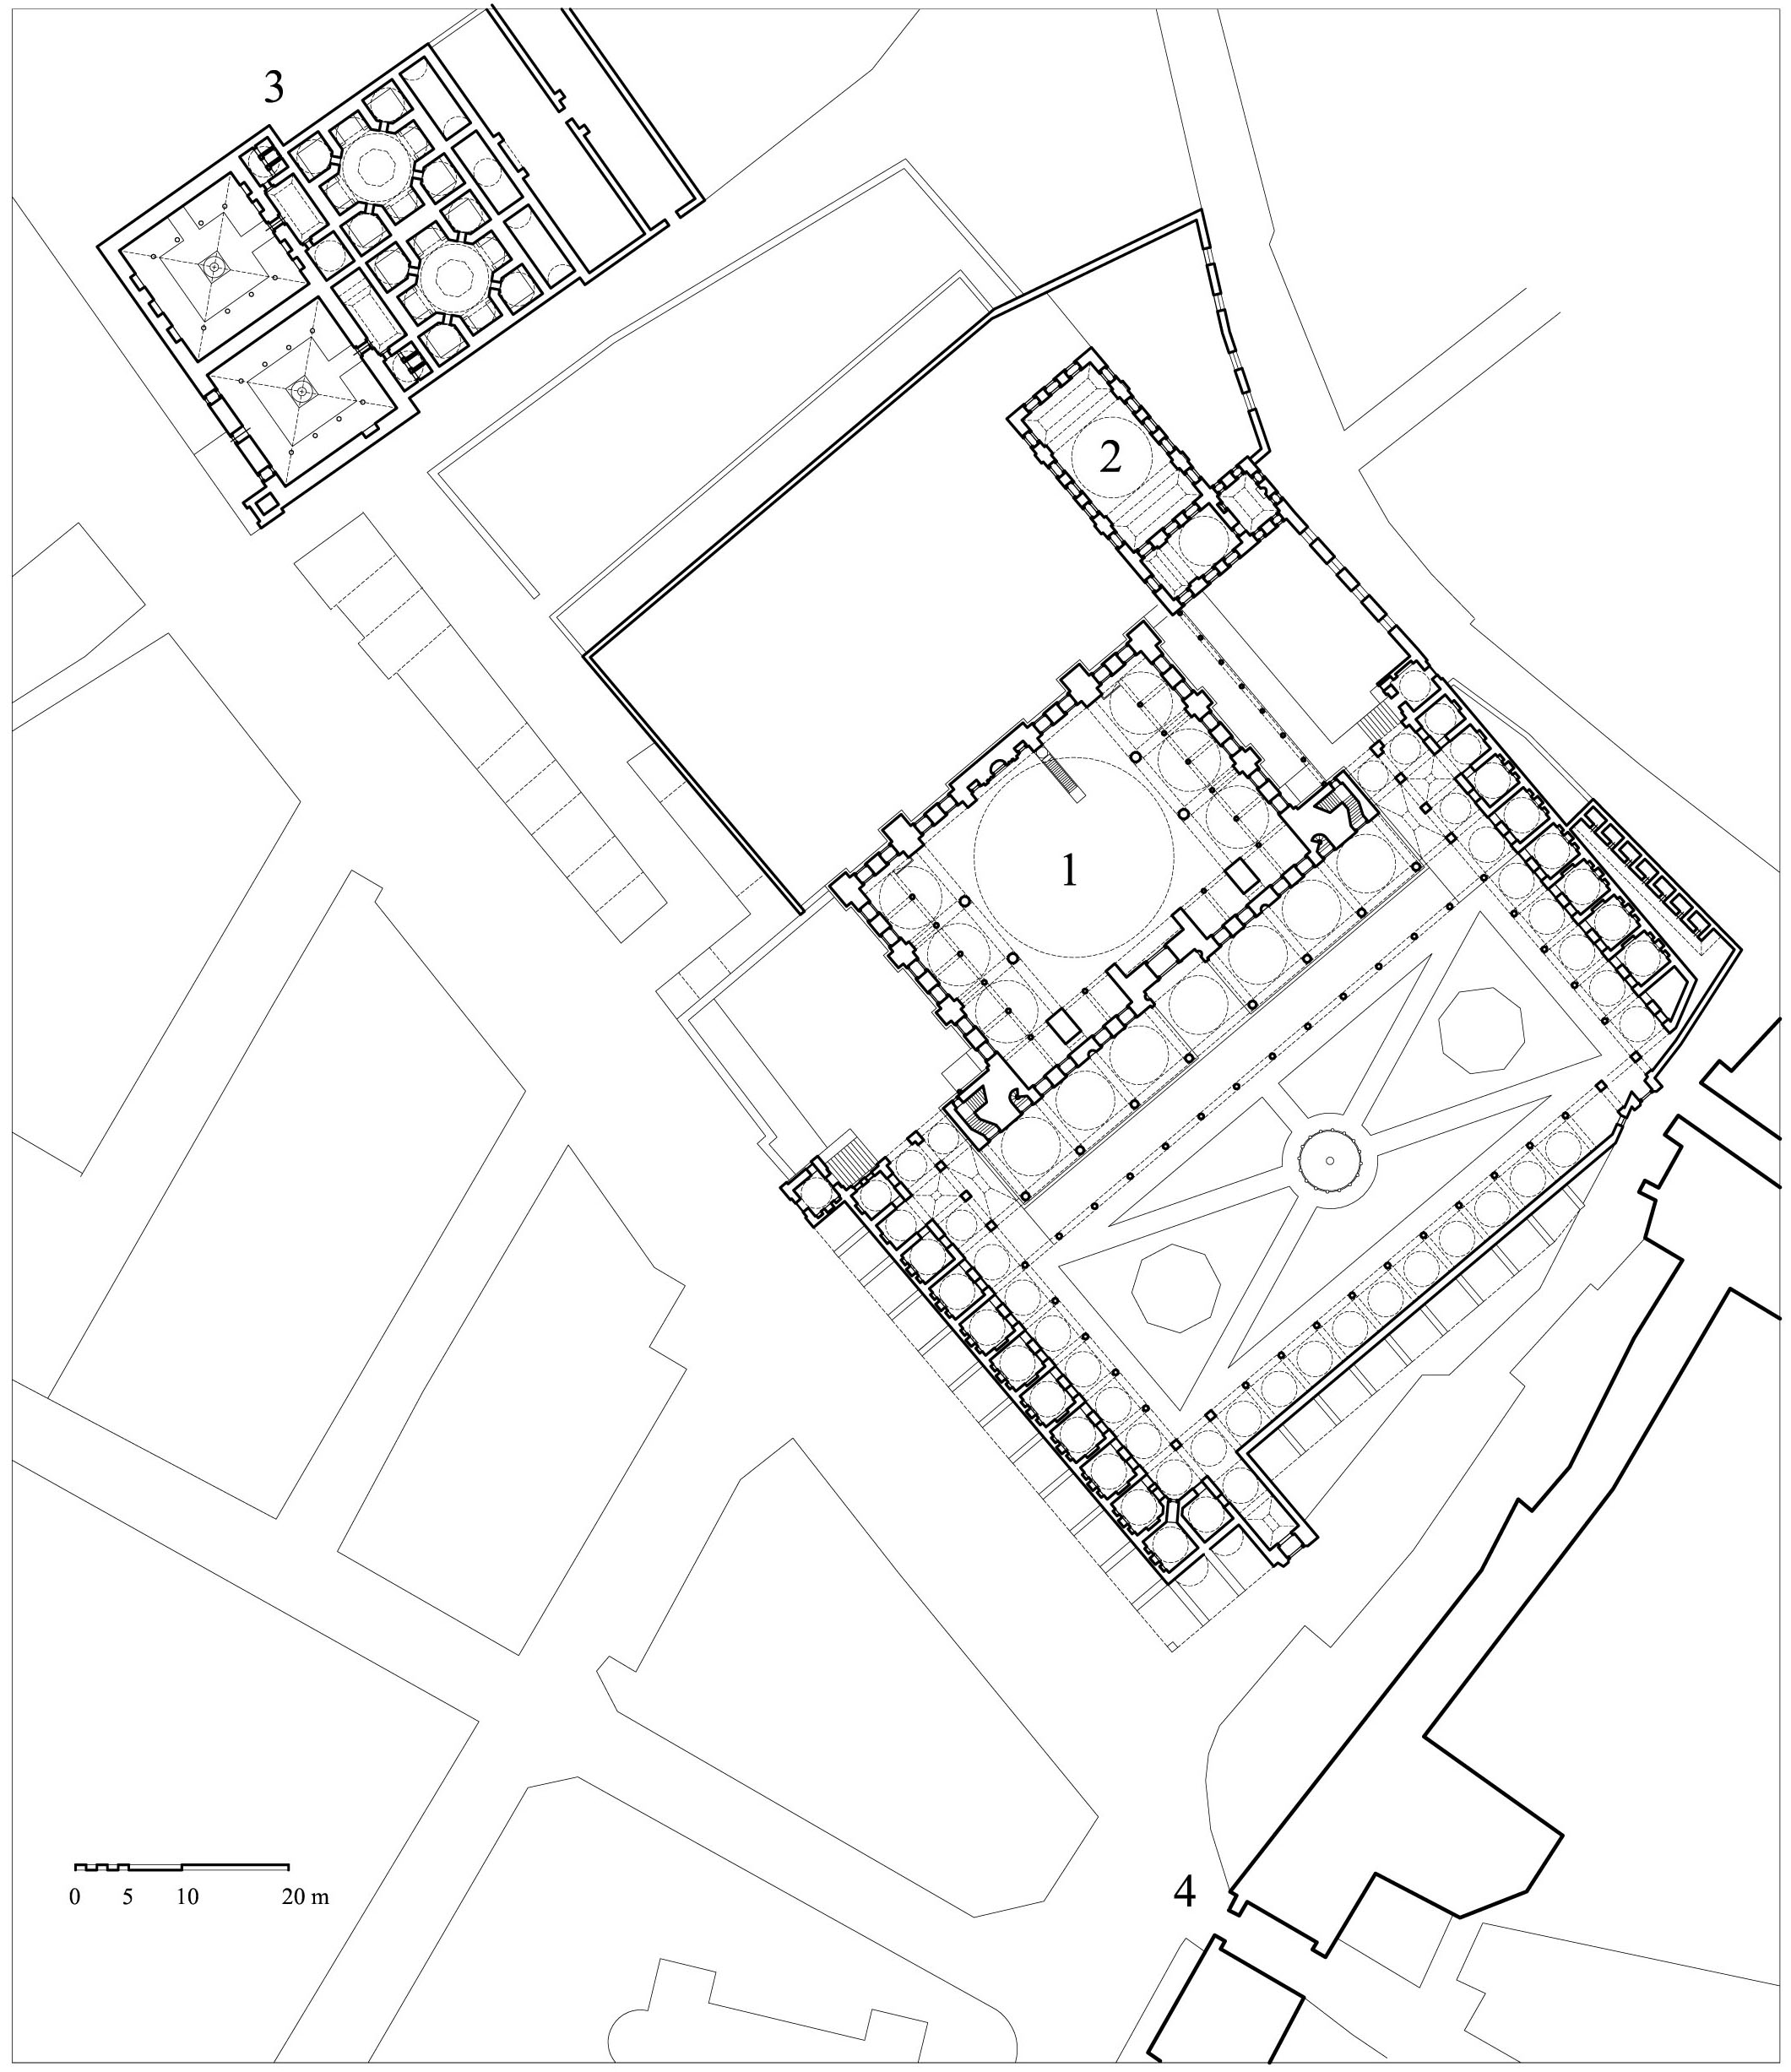 Mihrimah Sultan Külliyesi (Edirnekapı) - Floor plan of complex showing (1) mosque and madrasa, (2) Güzelce Ahmed Pasa mausoleum with school, (3) double bath with street fountain, (4) Edirne Gate of the city walls. DWG file in AutoCAD 2000 format. Click the download button to download a zipped file containing the .dwg file.